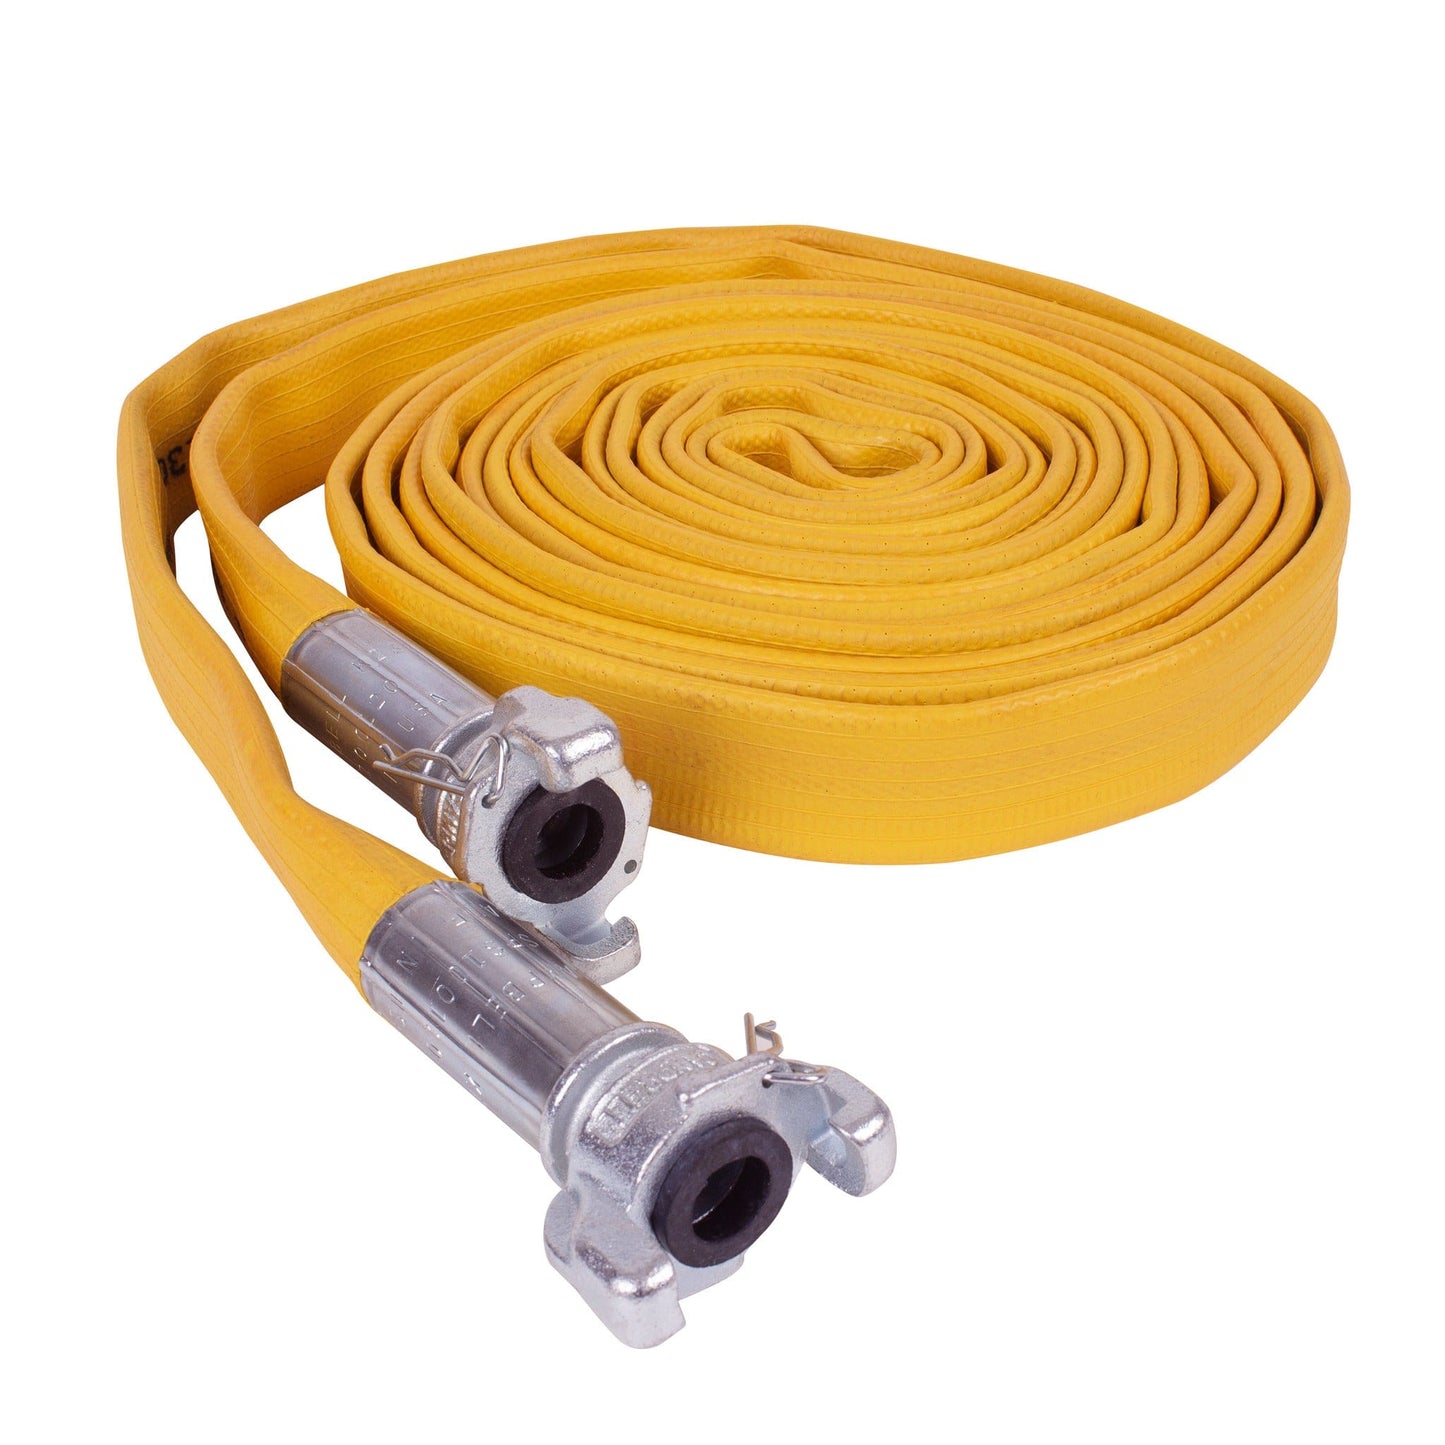 Lightweight Air Hose Assembly with Couplings - 1" ID x 25' (HT111)